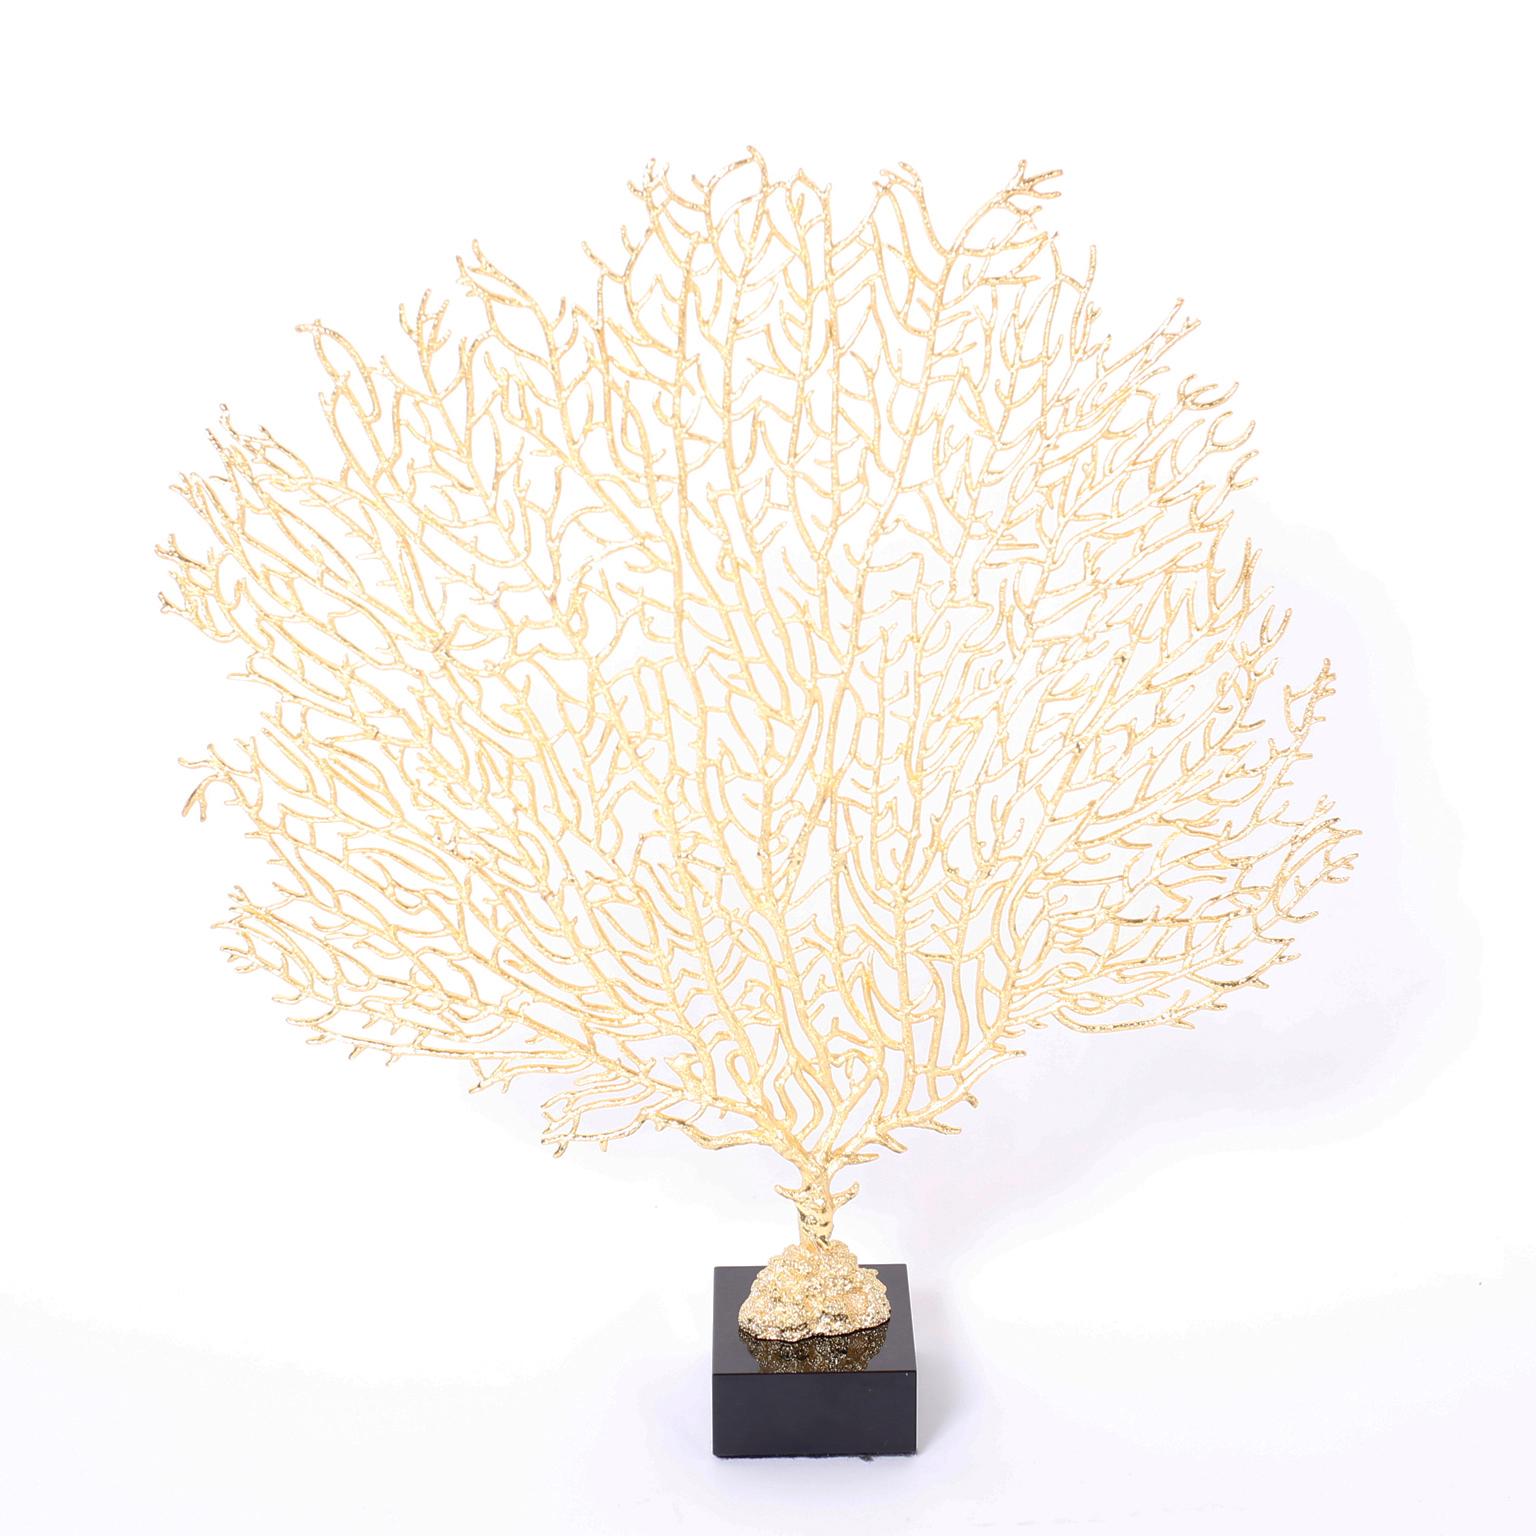 Dramatic pair of midcentury cast metal sea fans with their iconic form finished in gold leaf and presented on black glass bases.